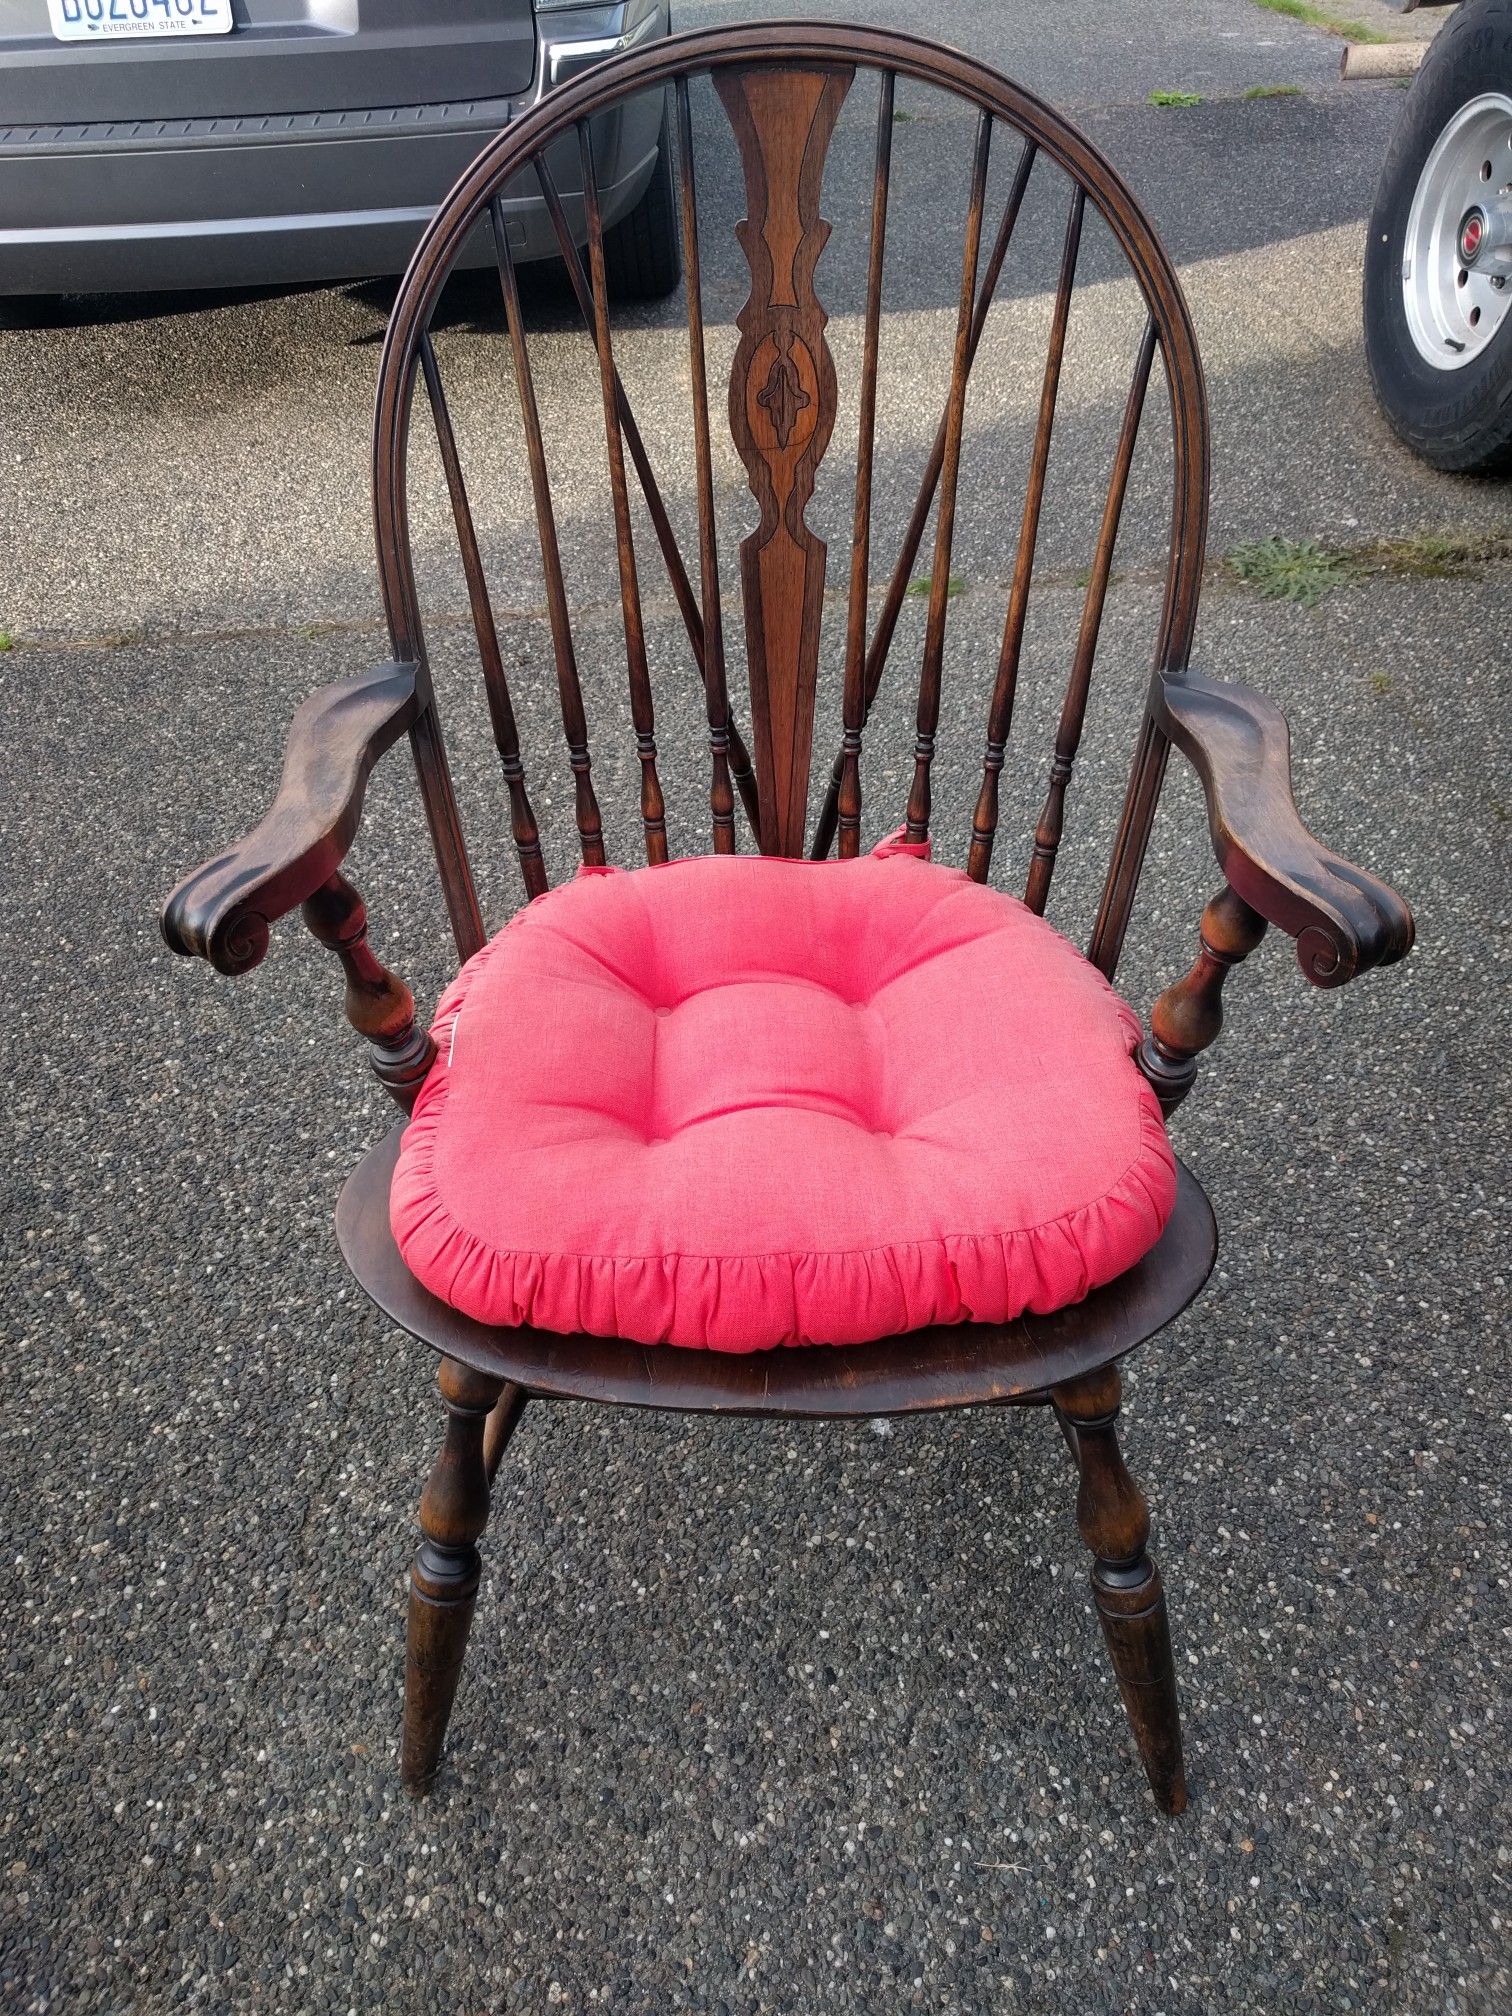 Vintage handmade solid wood chair in great condition